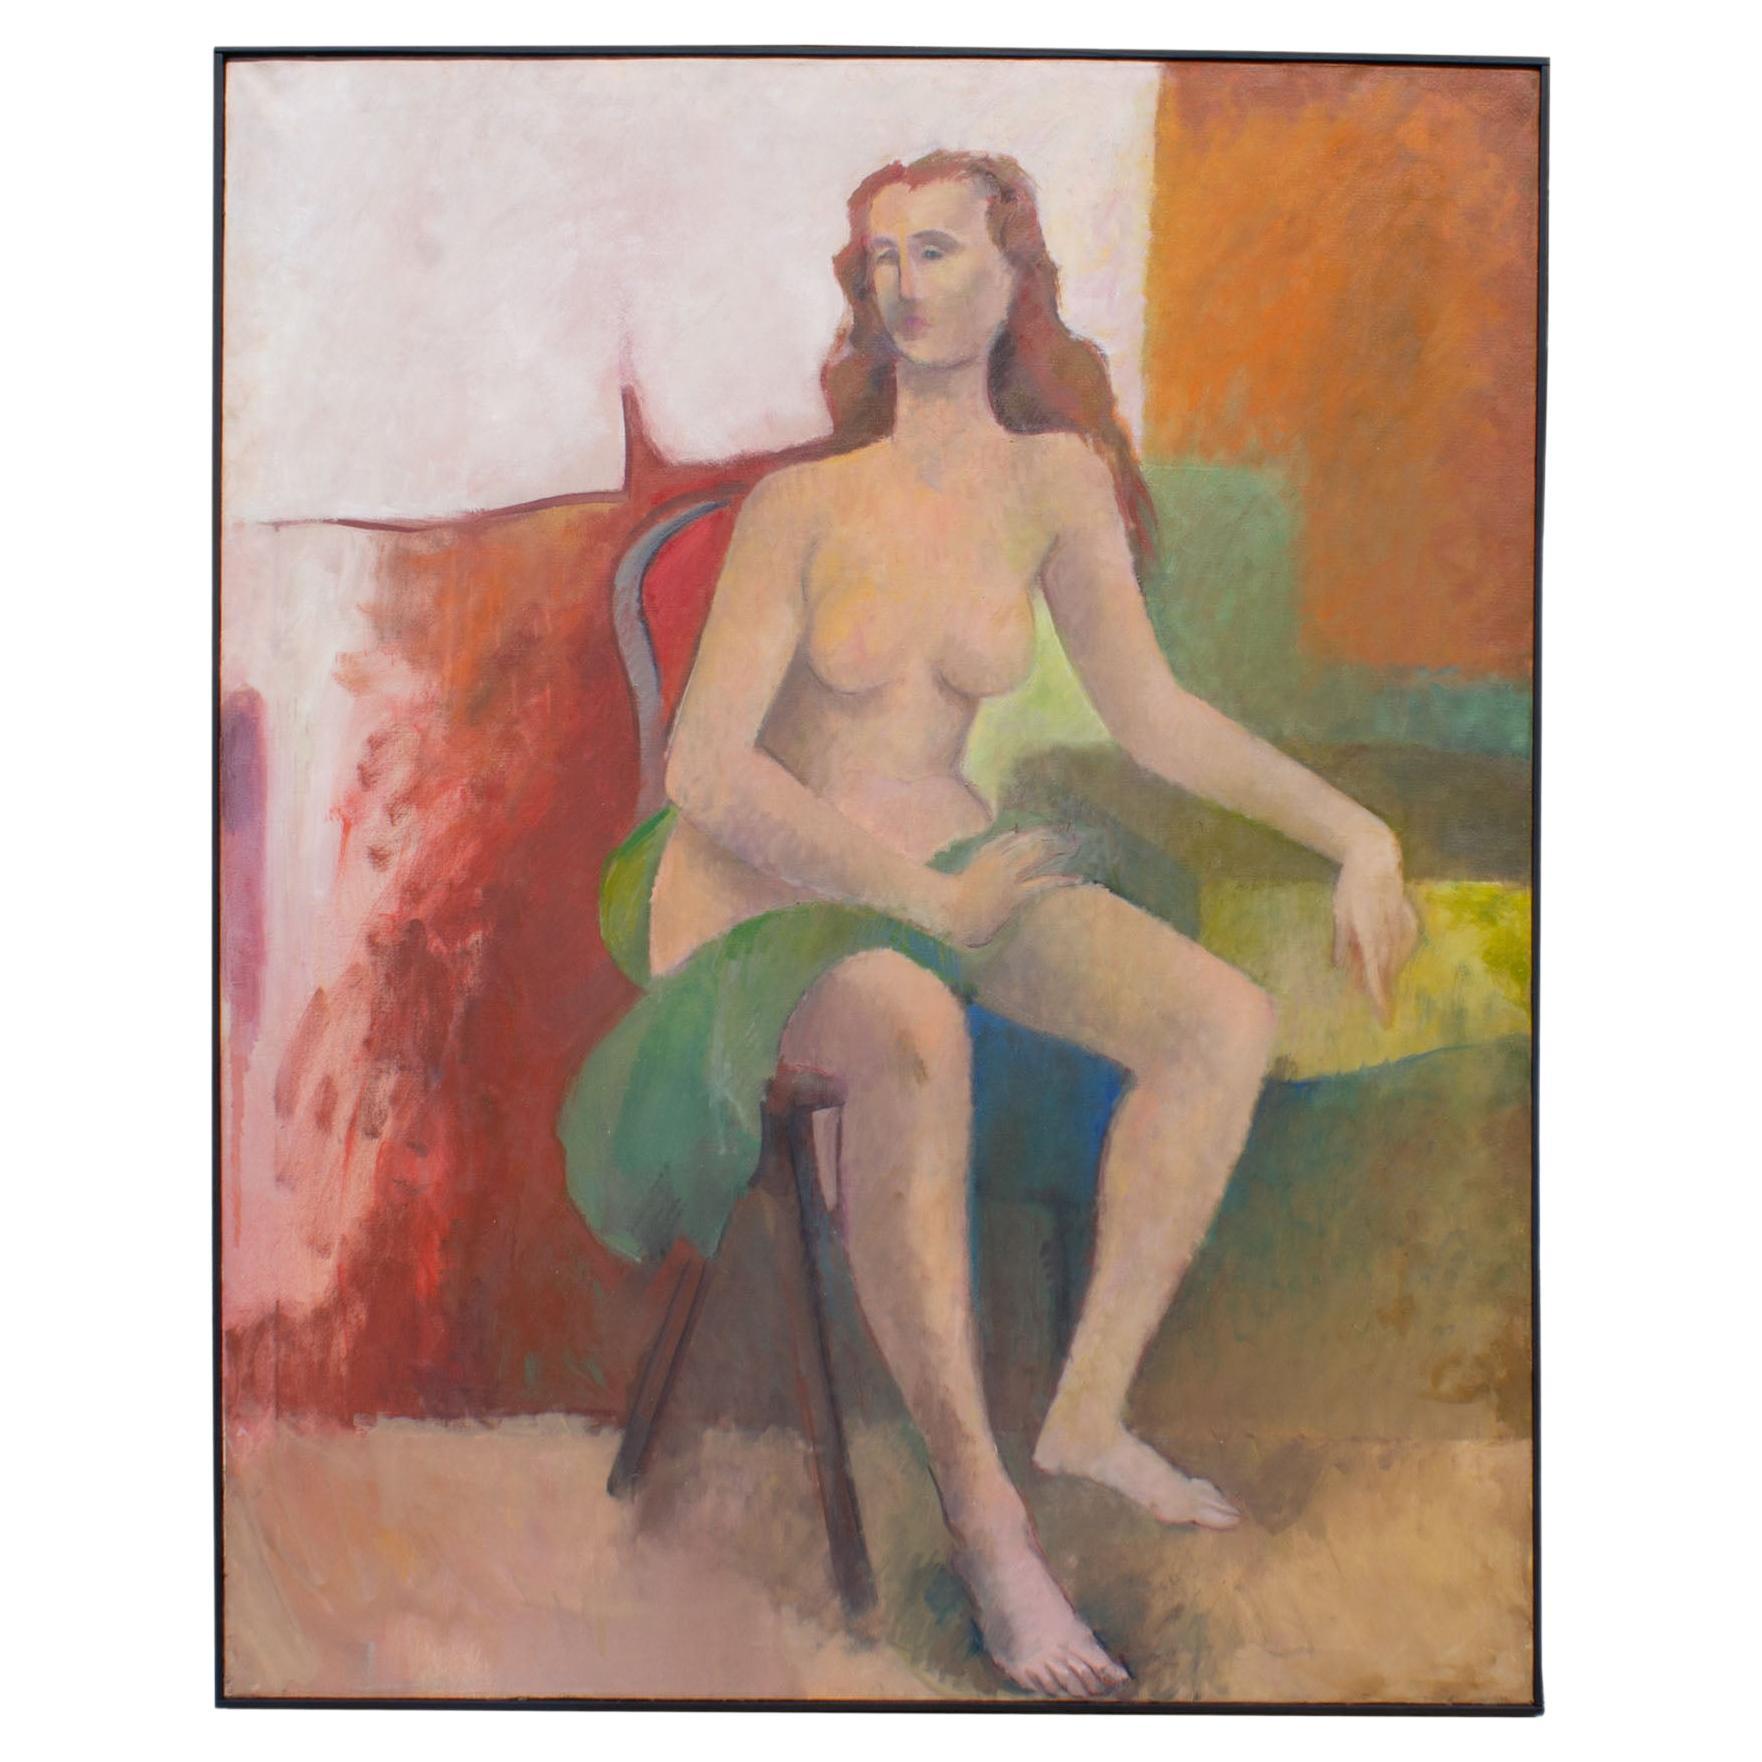 Walter Stomps Signed 1959 “Seated Nude” Oil on Canvas Abstract Painting